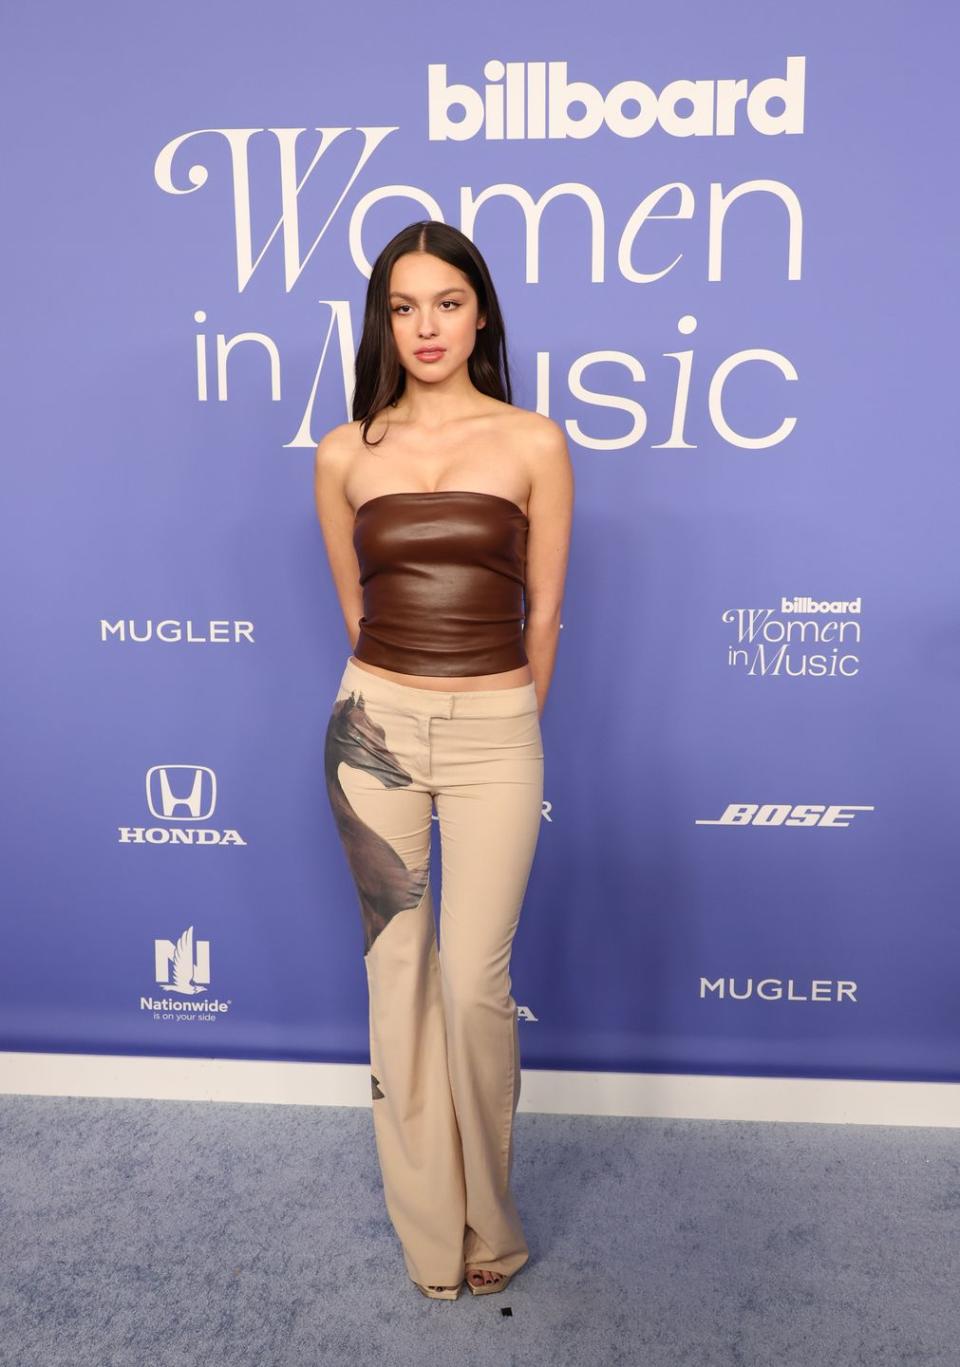 inglewood, california march 01 olivia rodrigo attends 2023 billboard women in music at youtube theater on march 01, 2023 in inglewood, california photo by monica schippergetty images